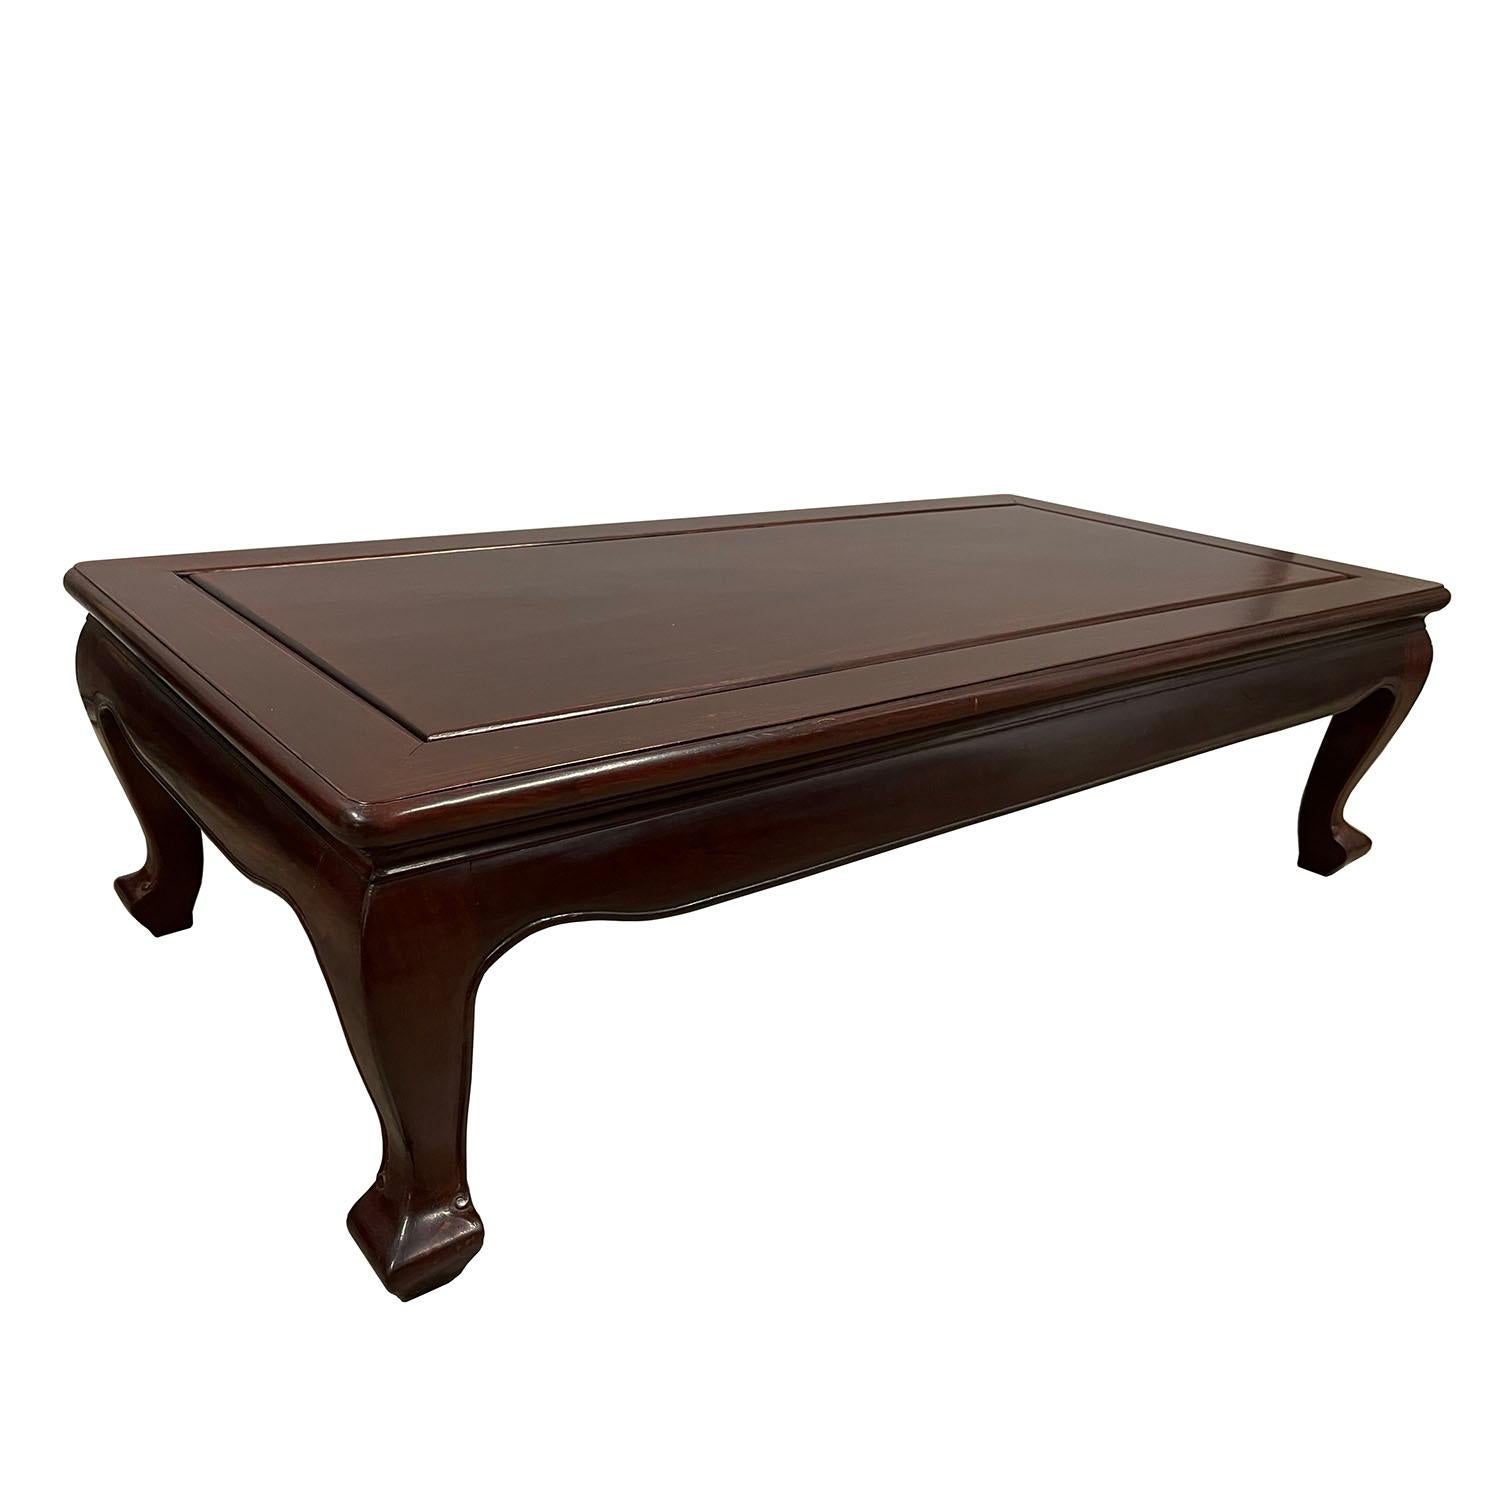 This classic solid rosewood coffee table has very simple narrow wrist design. The curved give a graceful and also sturdy look. Constructed with traditional joinery technique provides lasting strength and stability. From the pictures, You can see